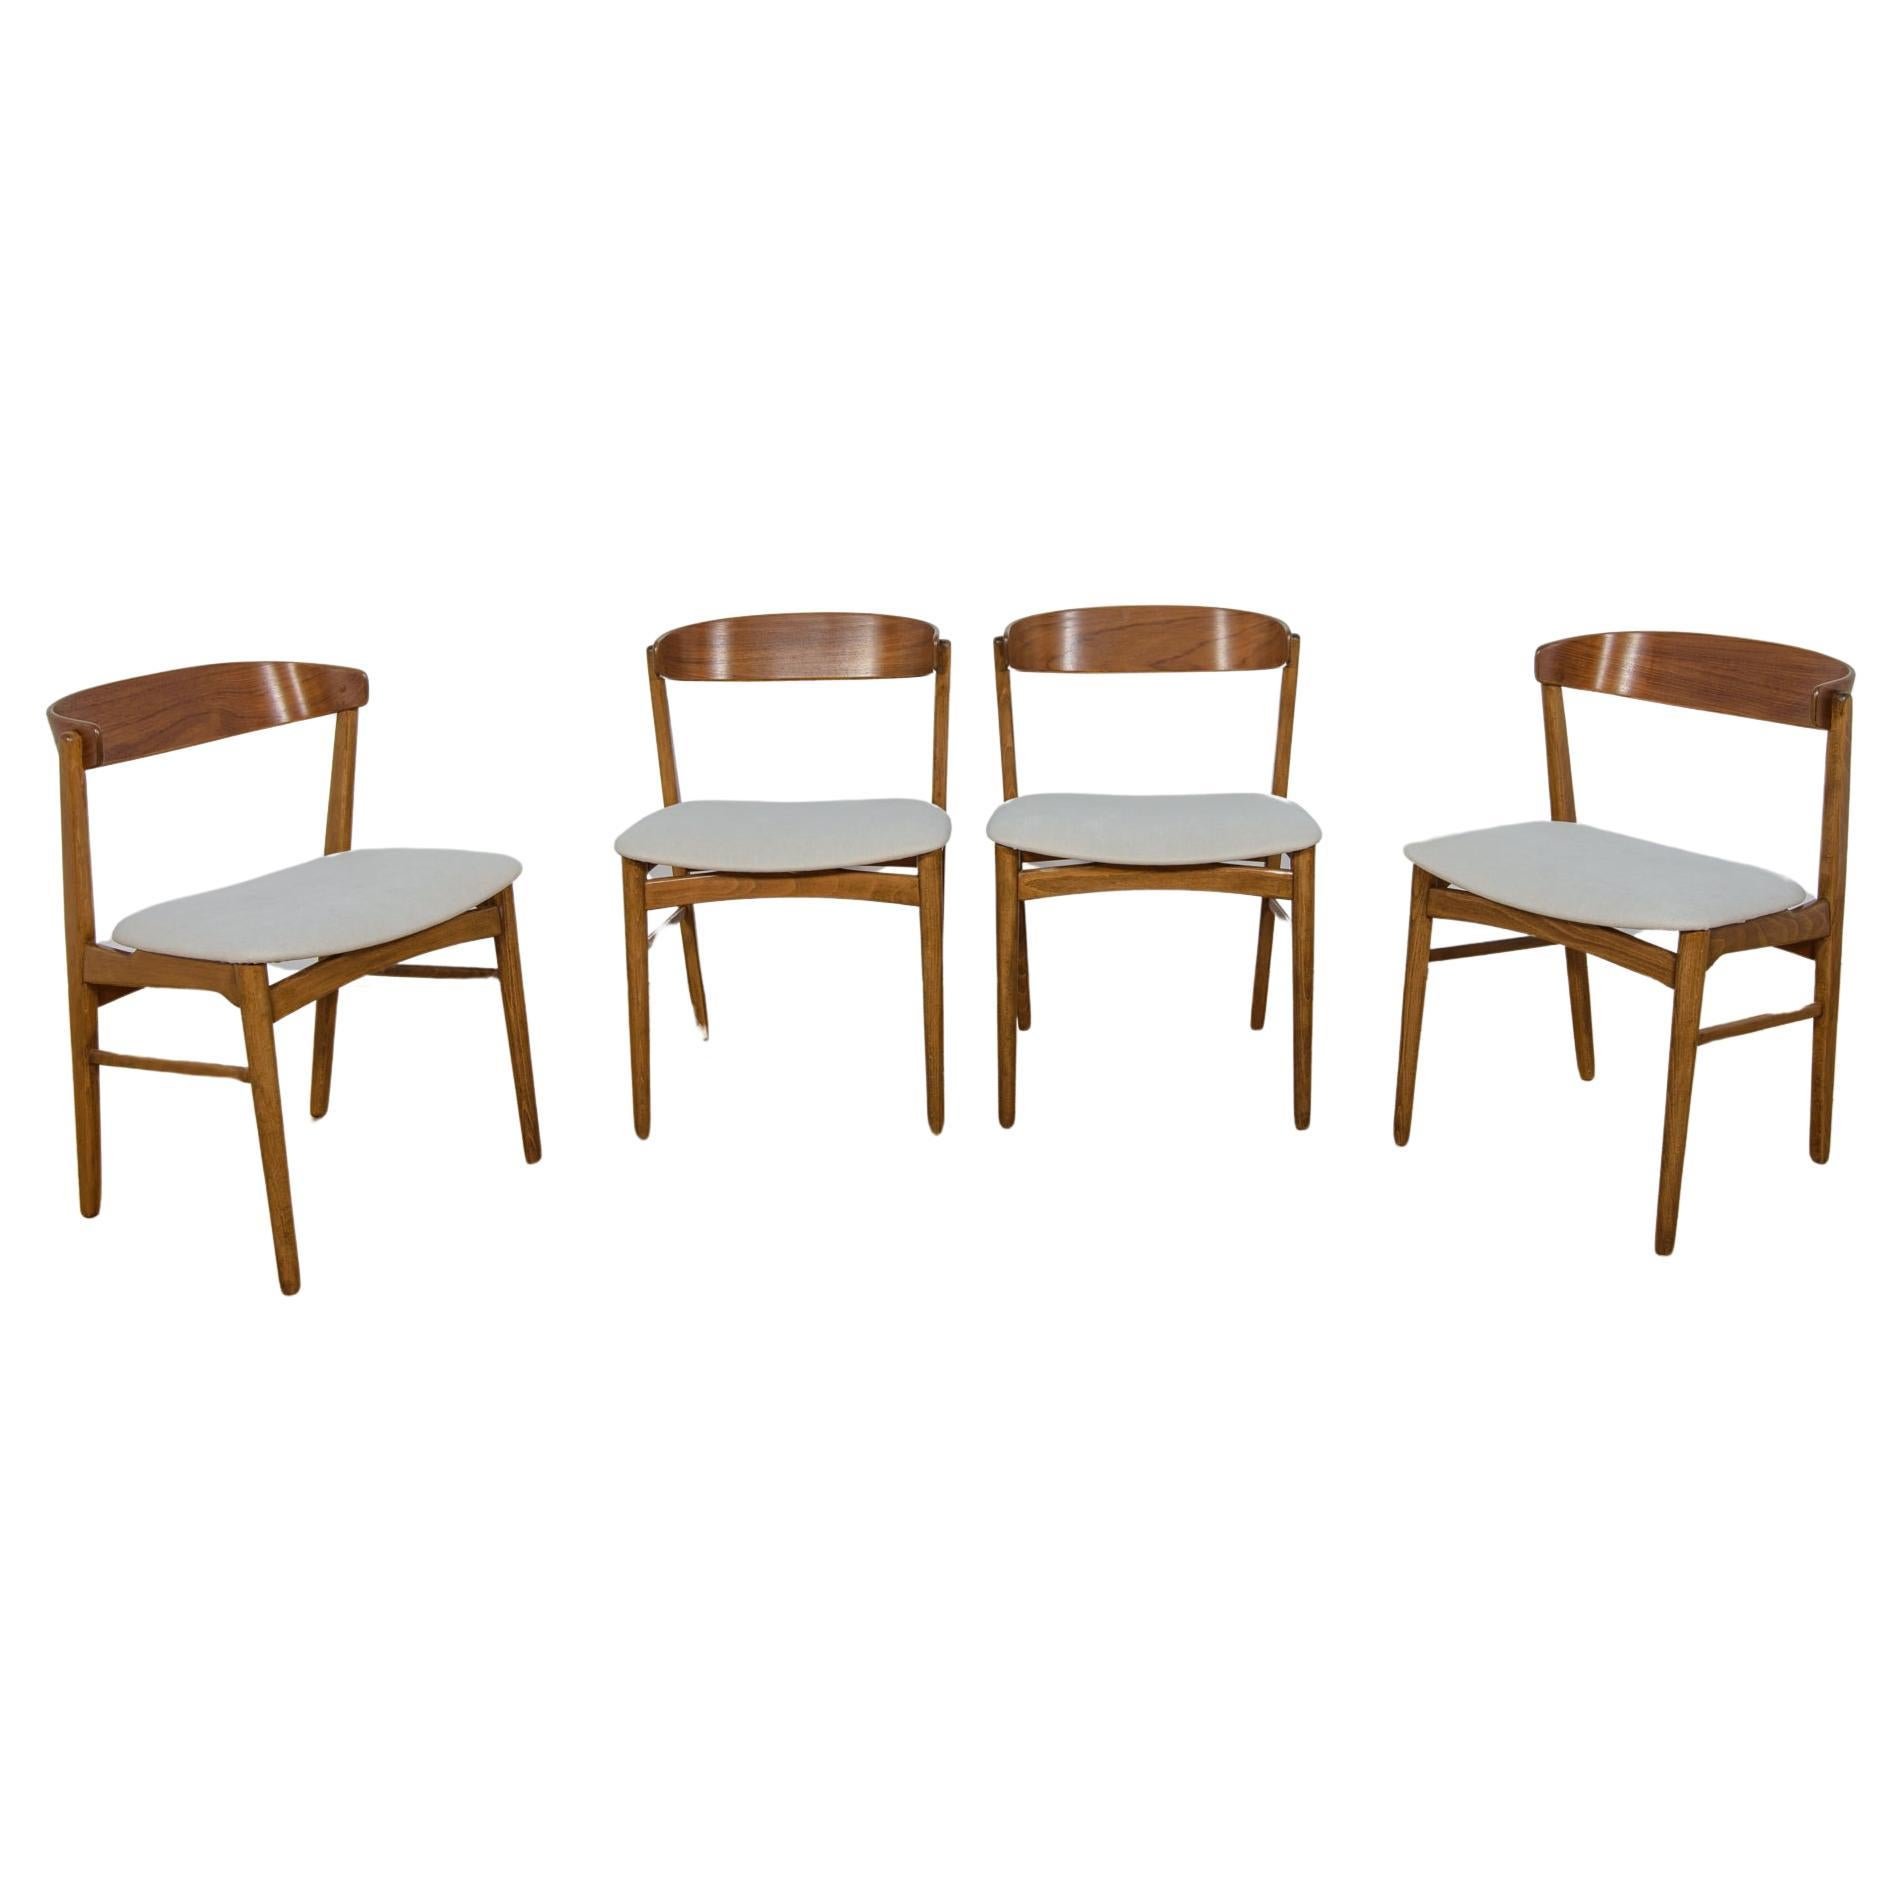 Mid-Century Model 206 Dining Chairs from Farstrup Furniture, 1960s, Denmark. For Sale